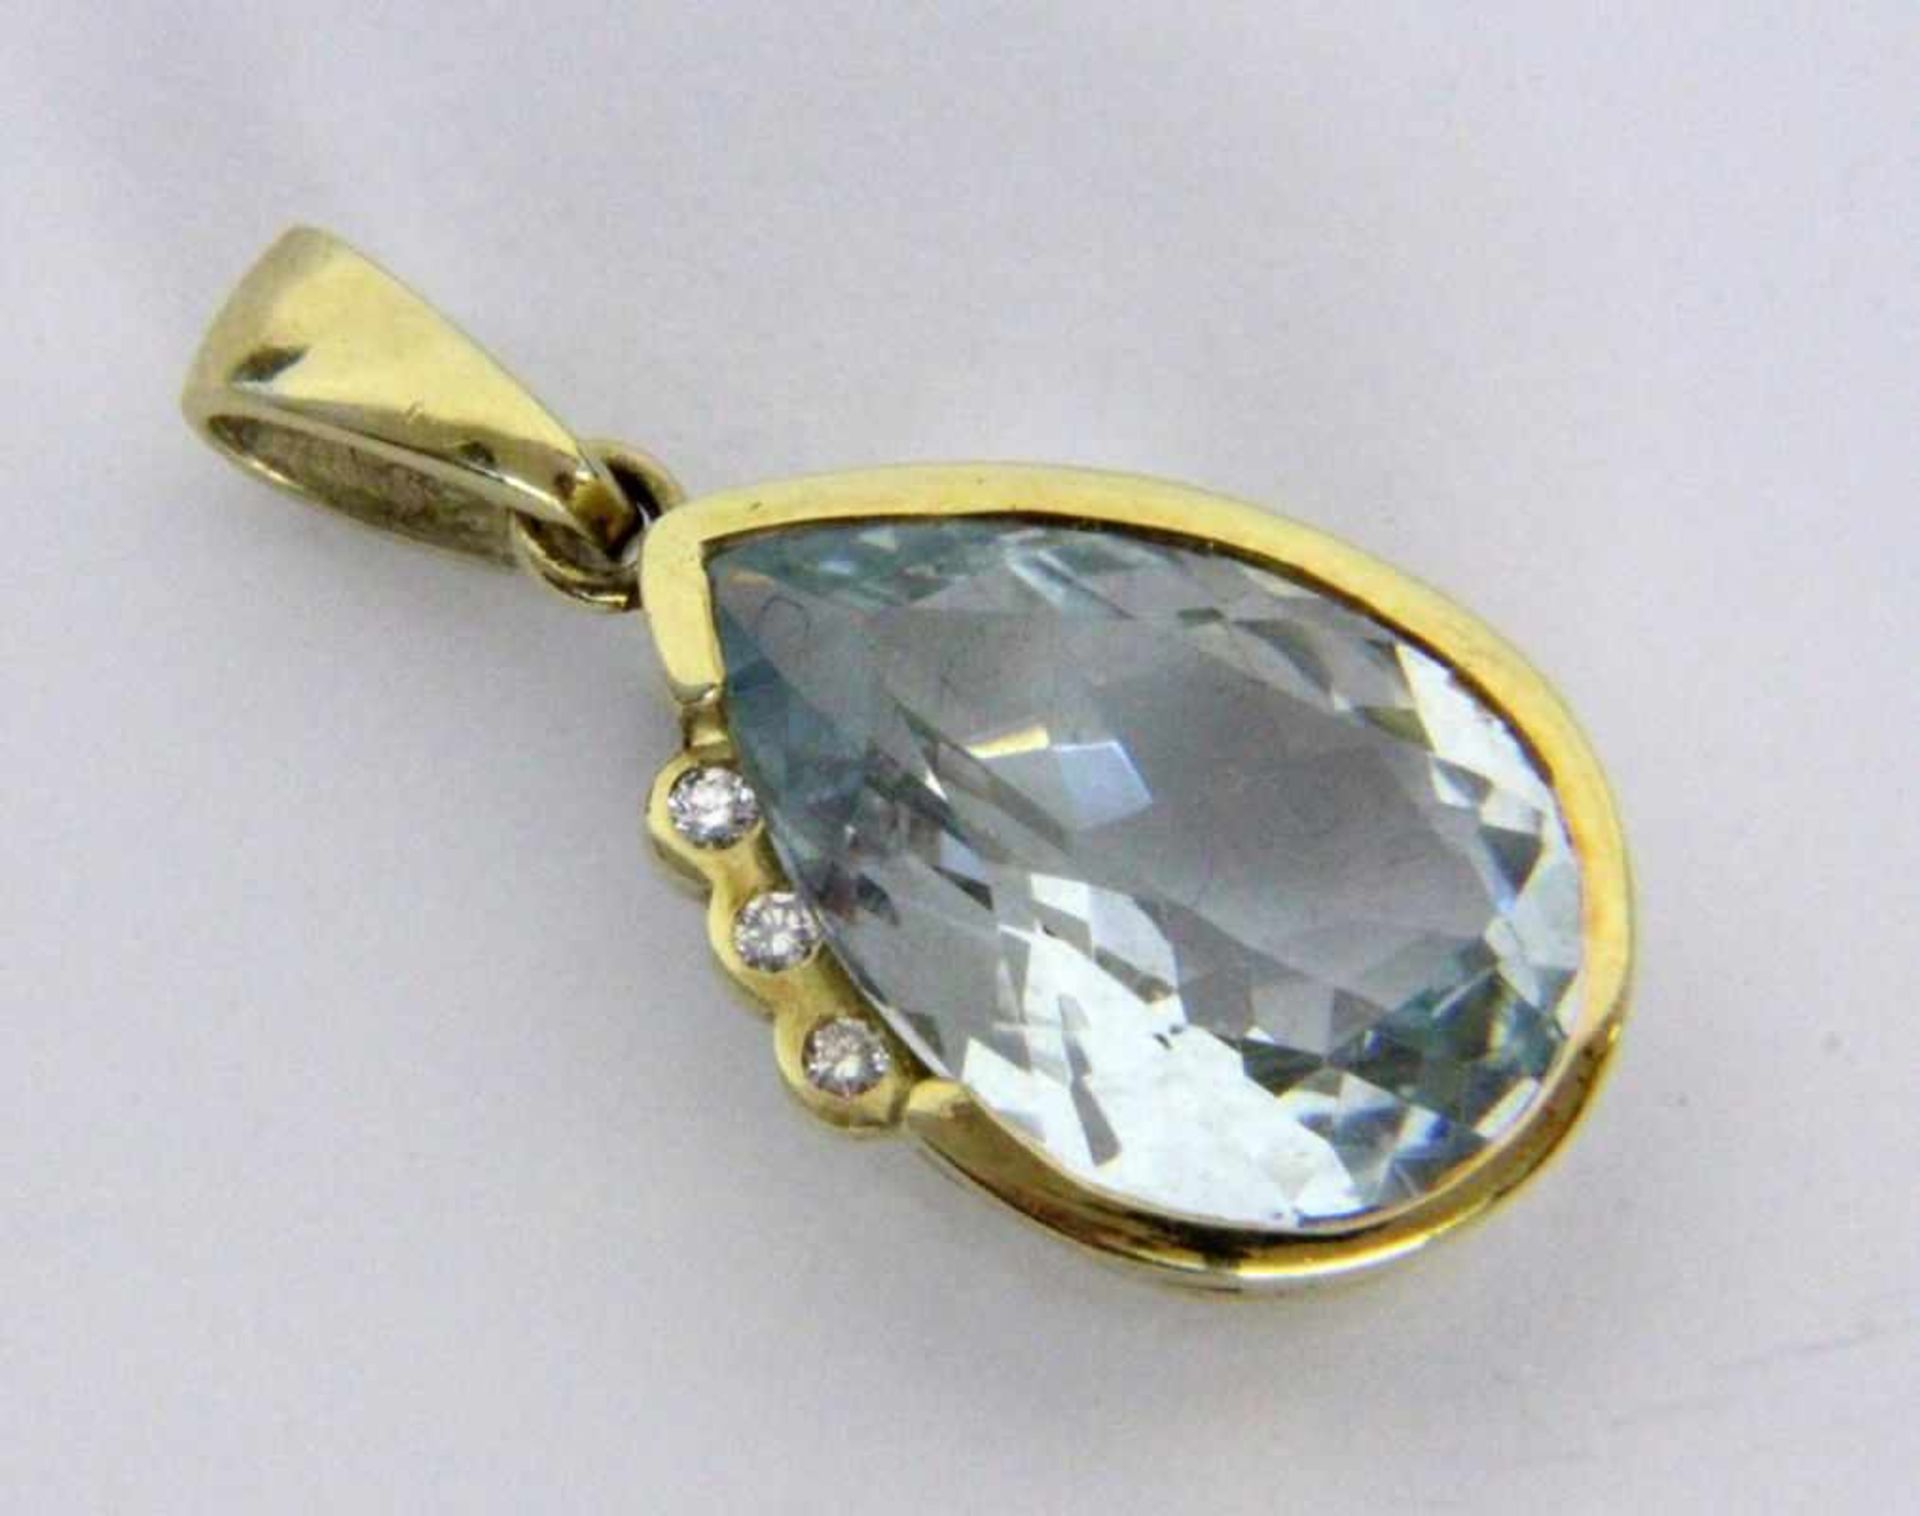 ''A PENDANT 585/000 yellow gold with fine aquamarine drop, approx. 18 x 12 x 6 mm and 3